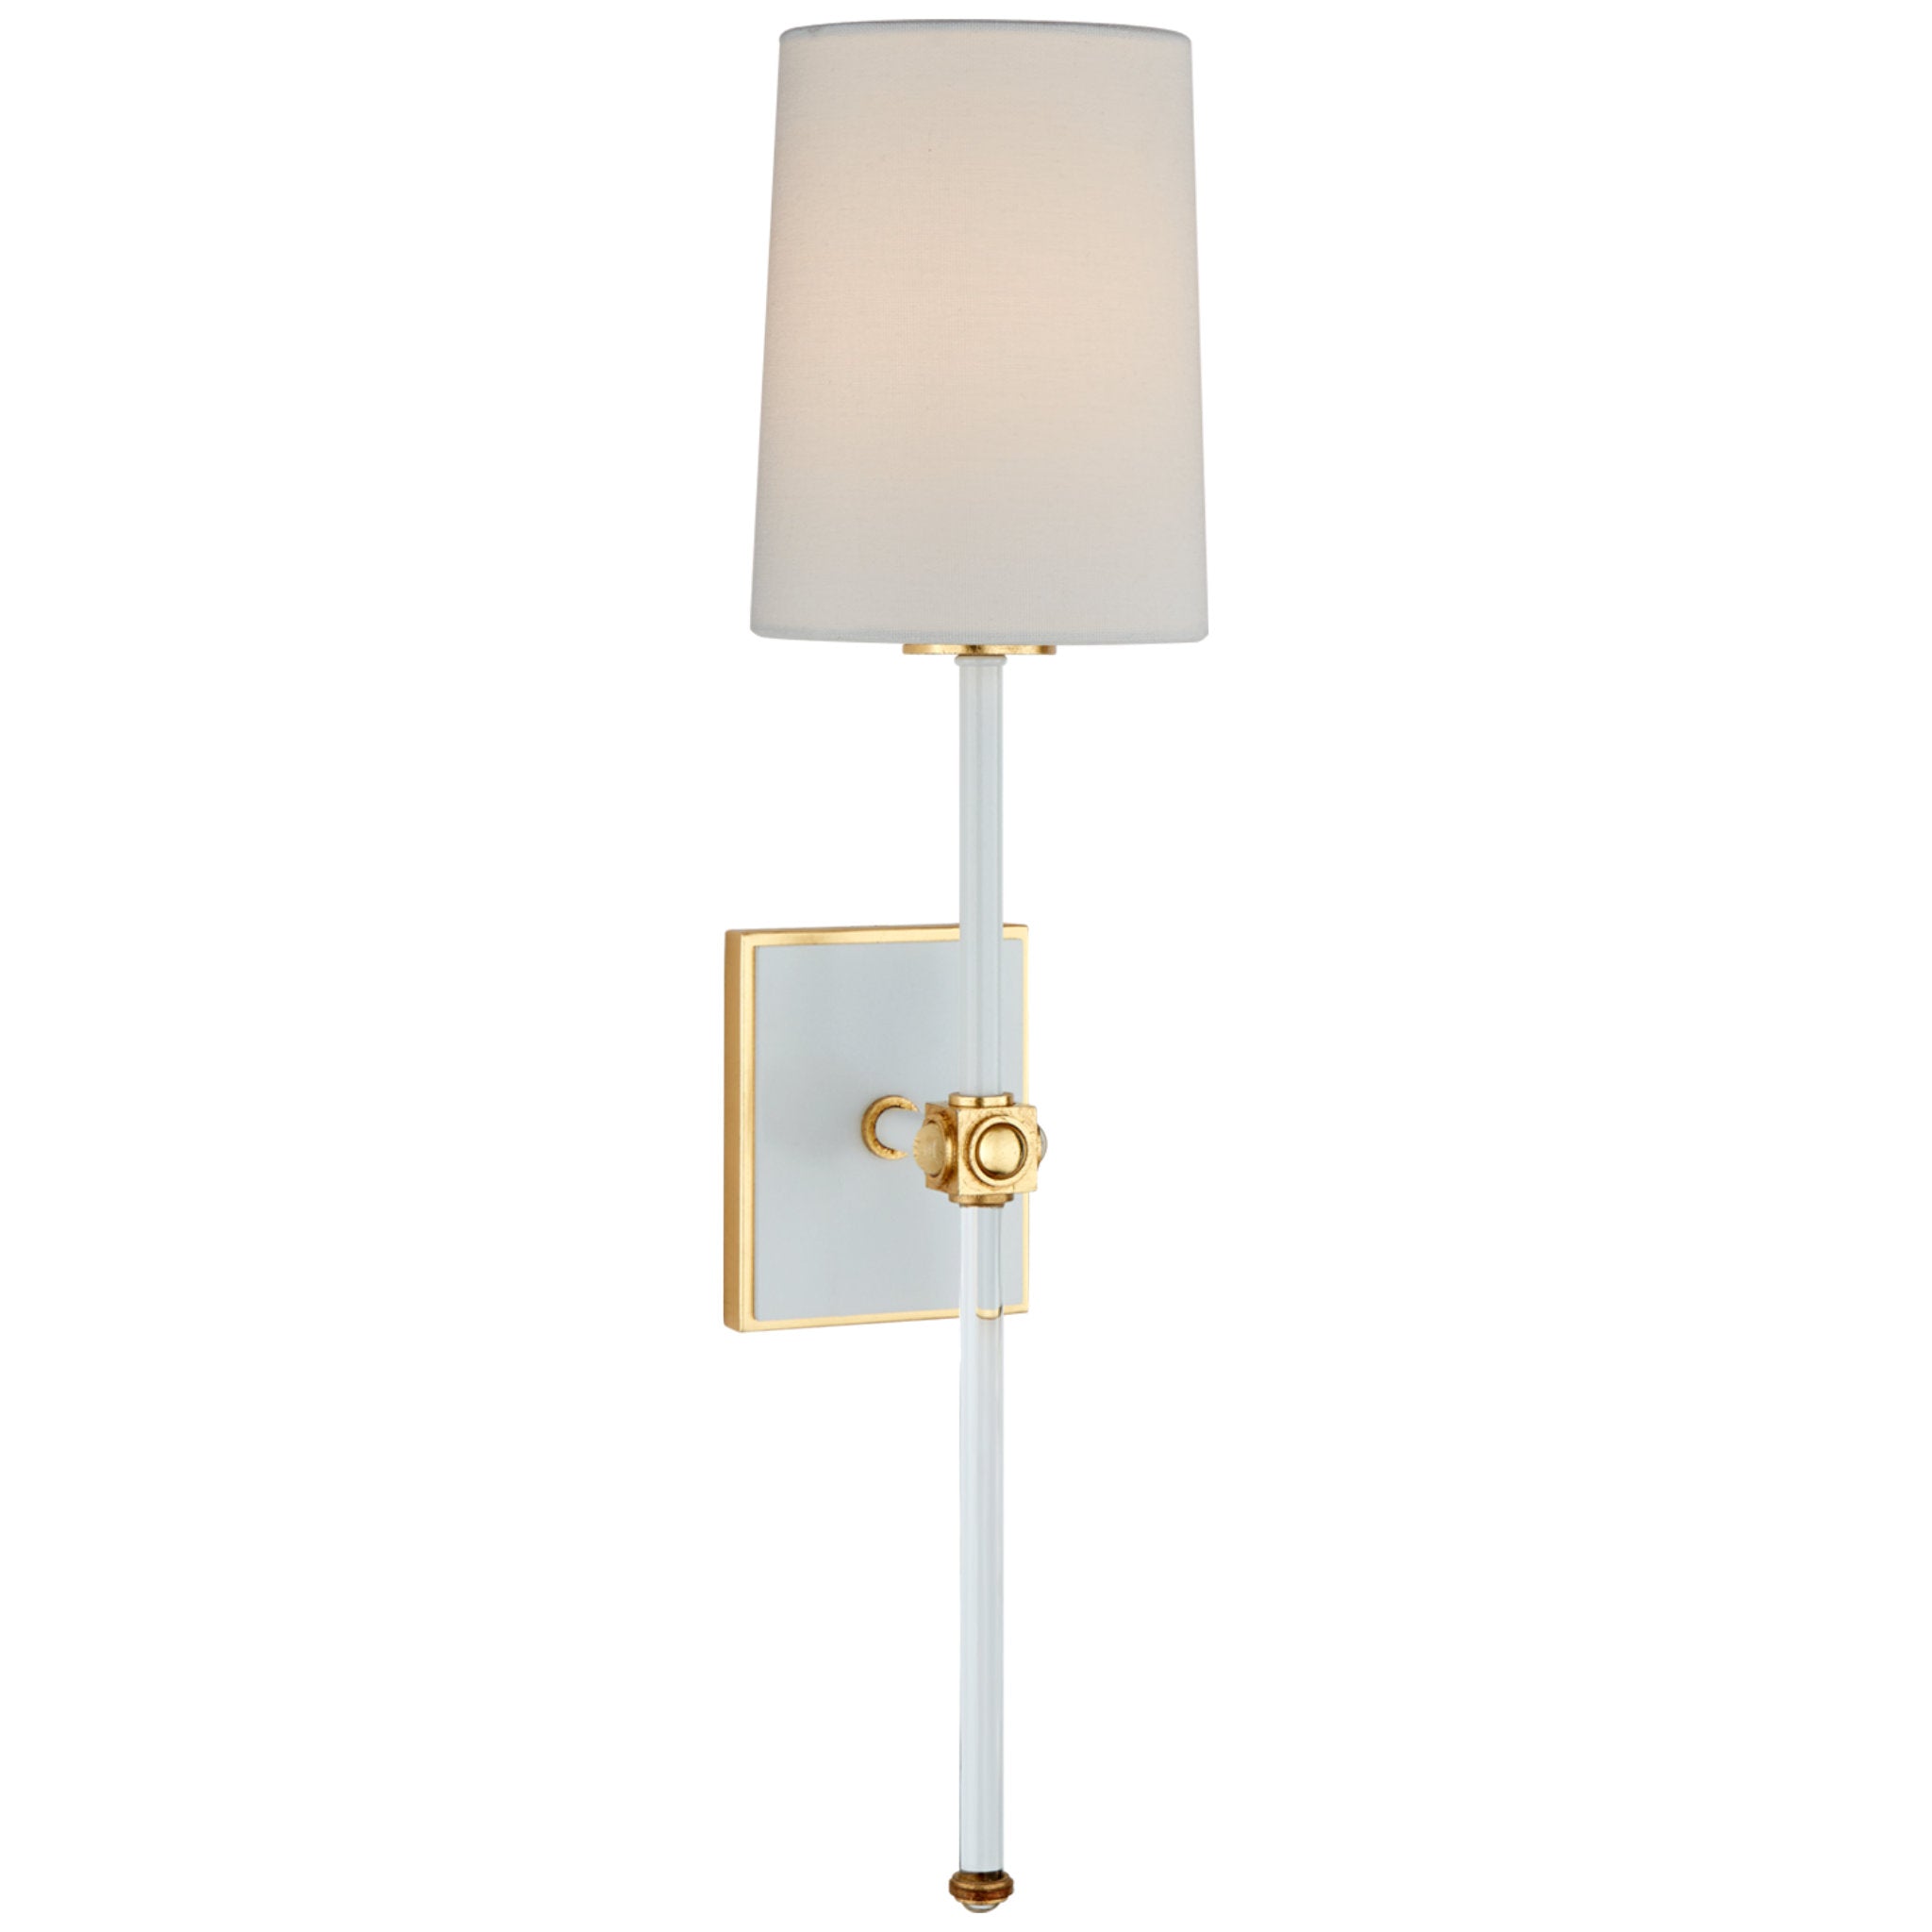 Julie Neill Lucia Medium Tail Sconce in Matte White and Crystal with Linen Shade